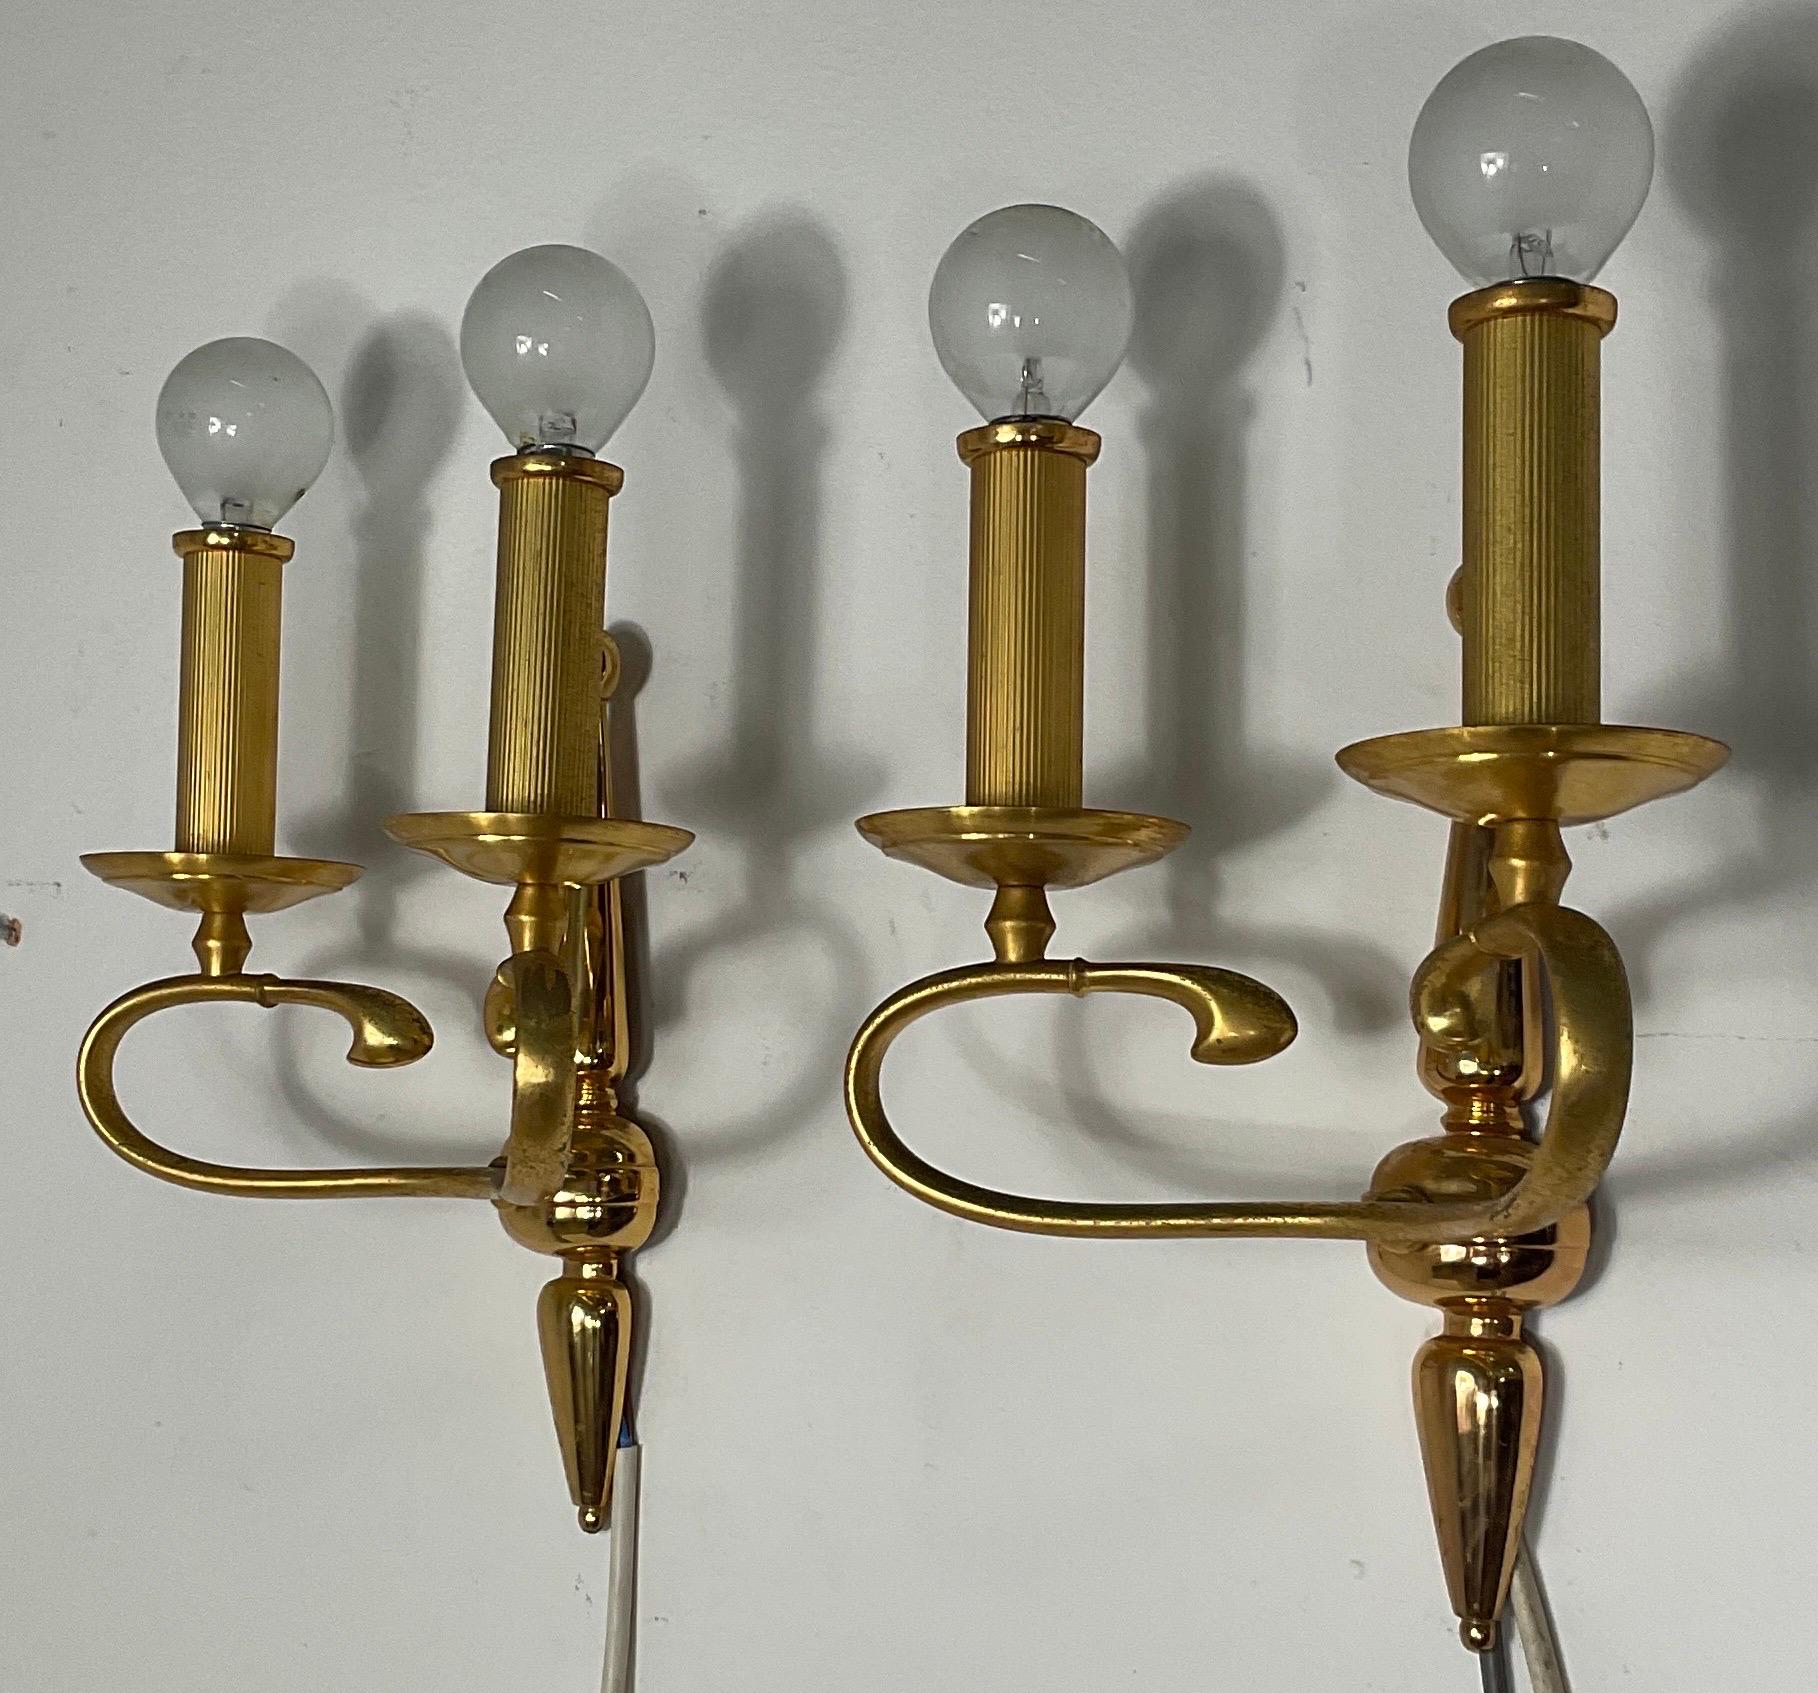 A pair of high quality solid brass italian wall sconces, they work 110-240 volts and need regular e14 bulbs. The brass original patina gives them a vibrant vintage look.